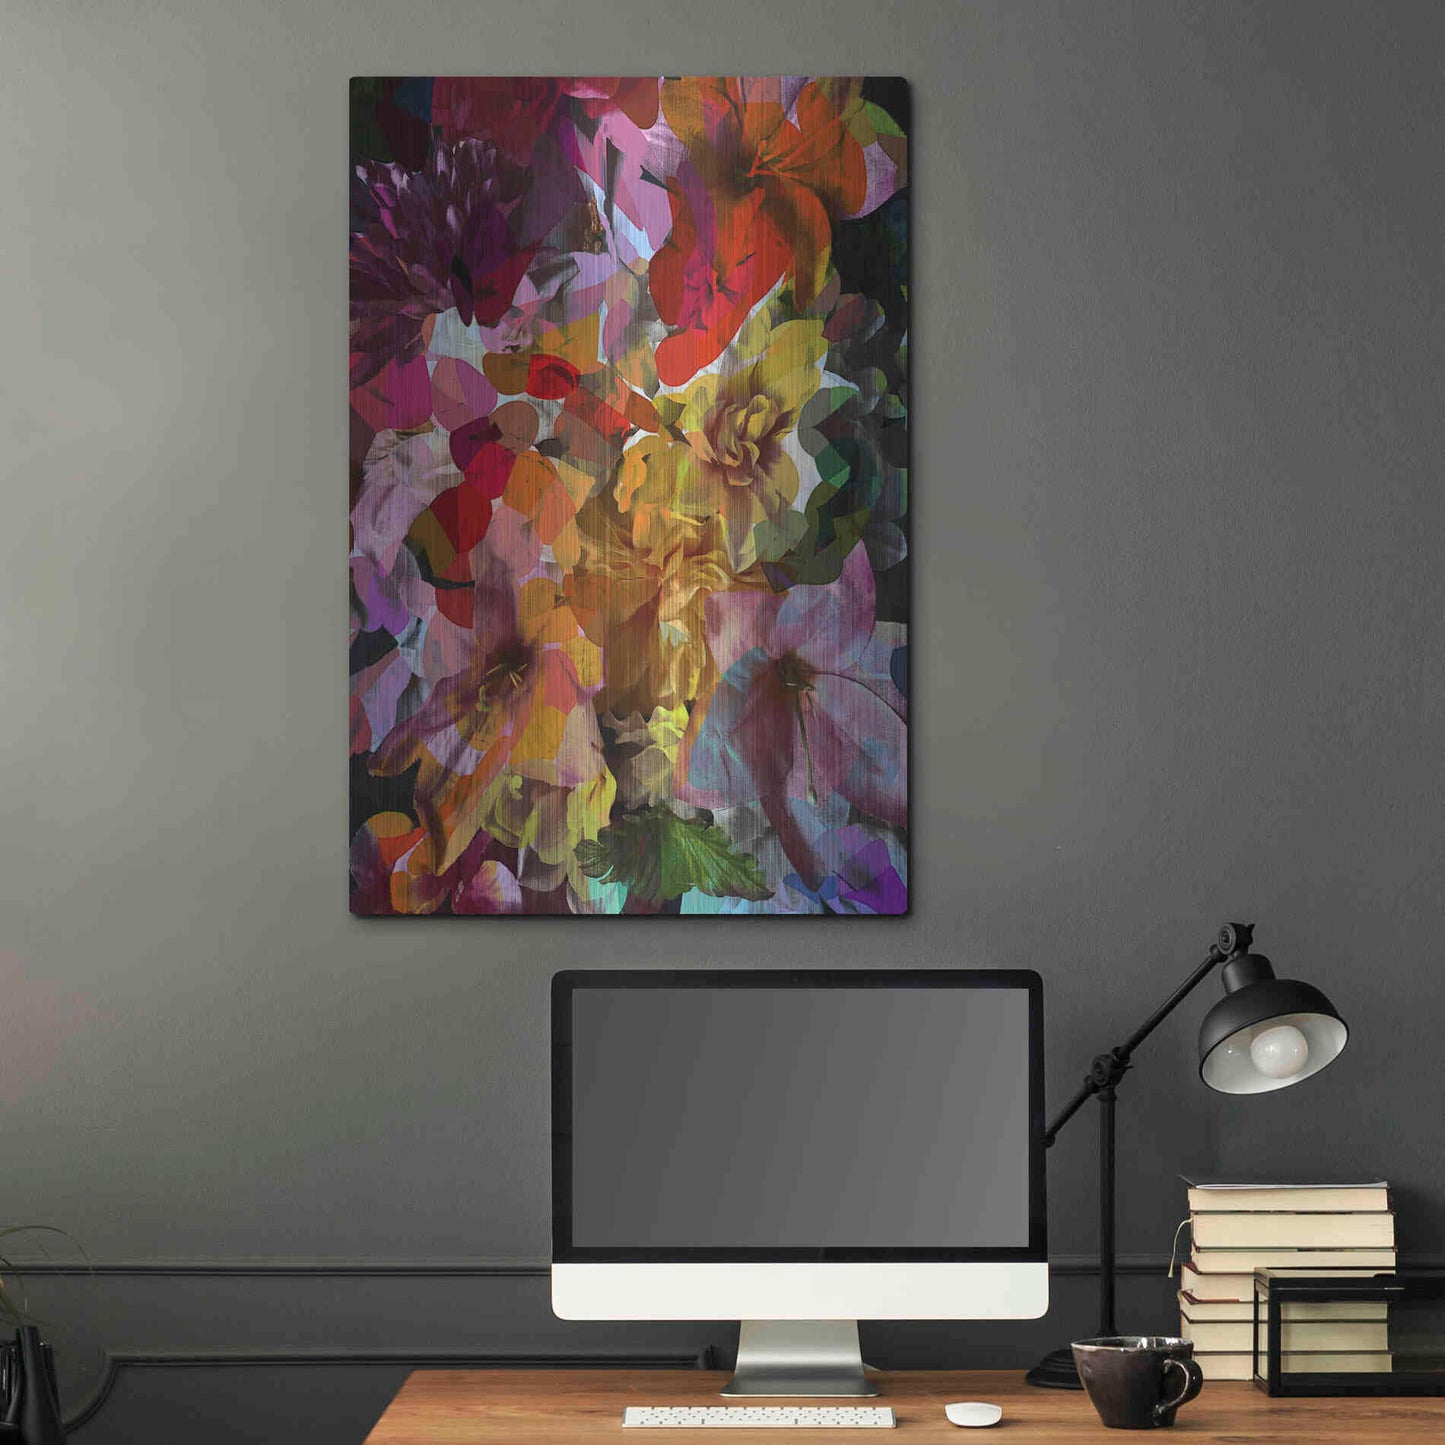 Luxe Metal Art 'Abstract Floral' by Shandra Smith, Metal Wall Art,24x36